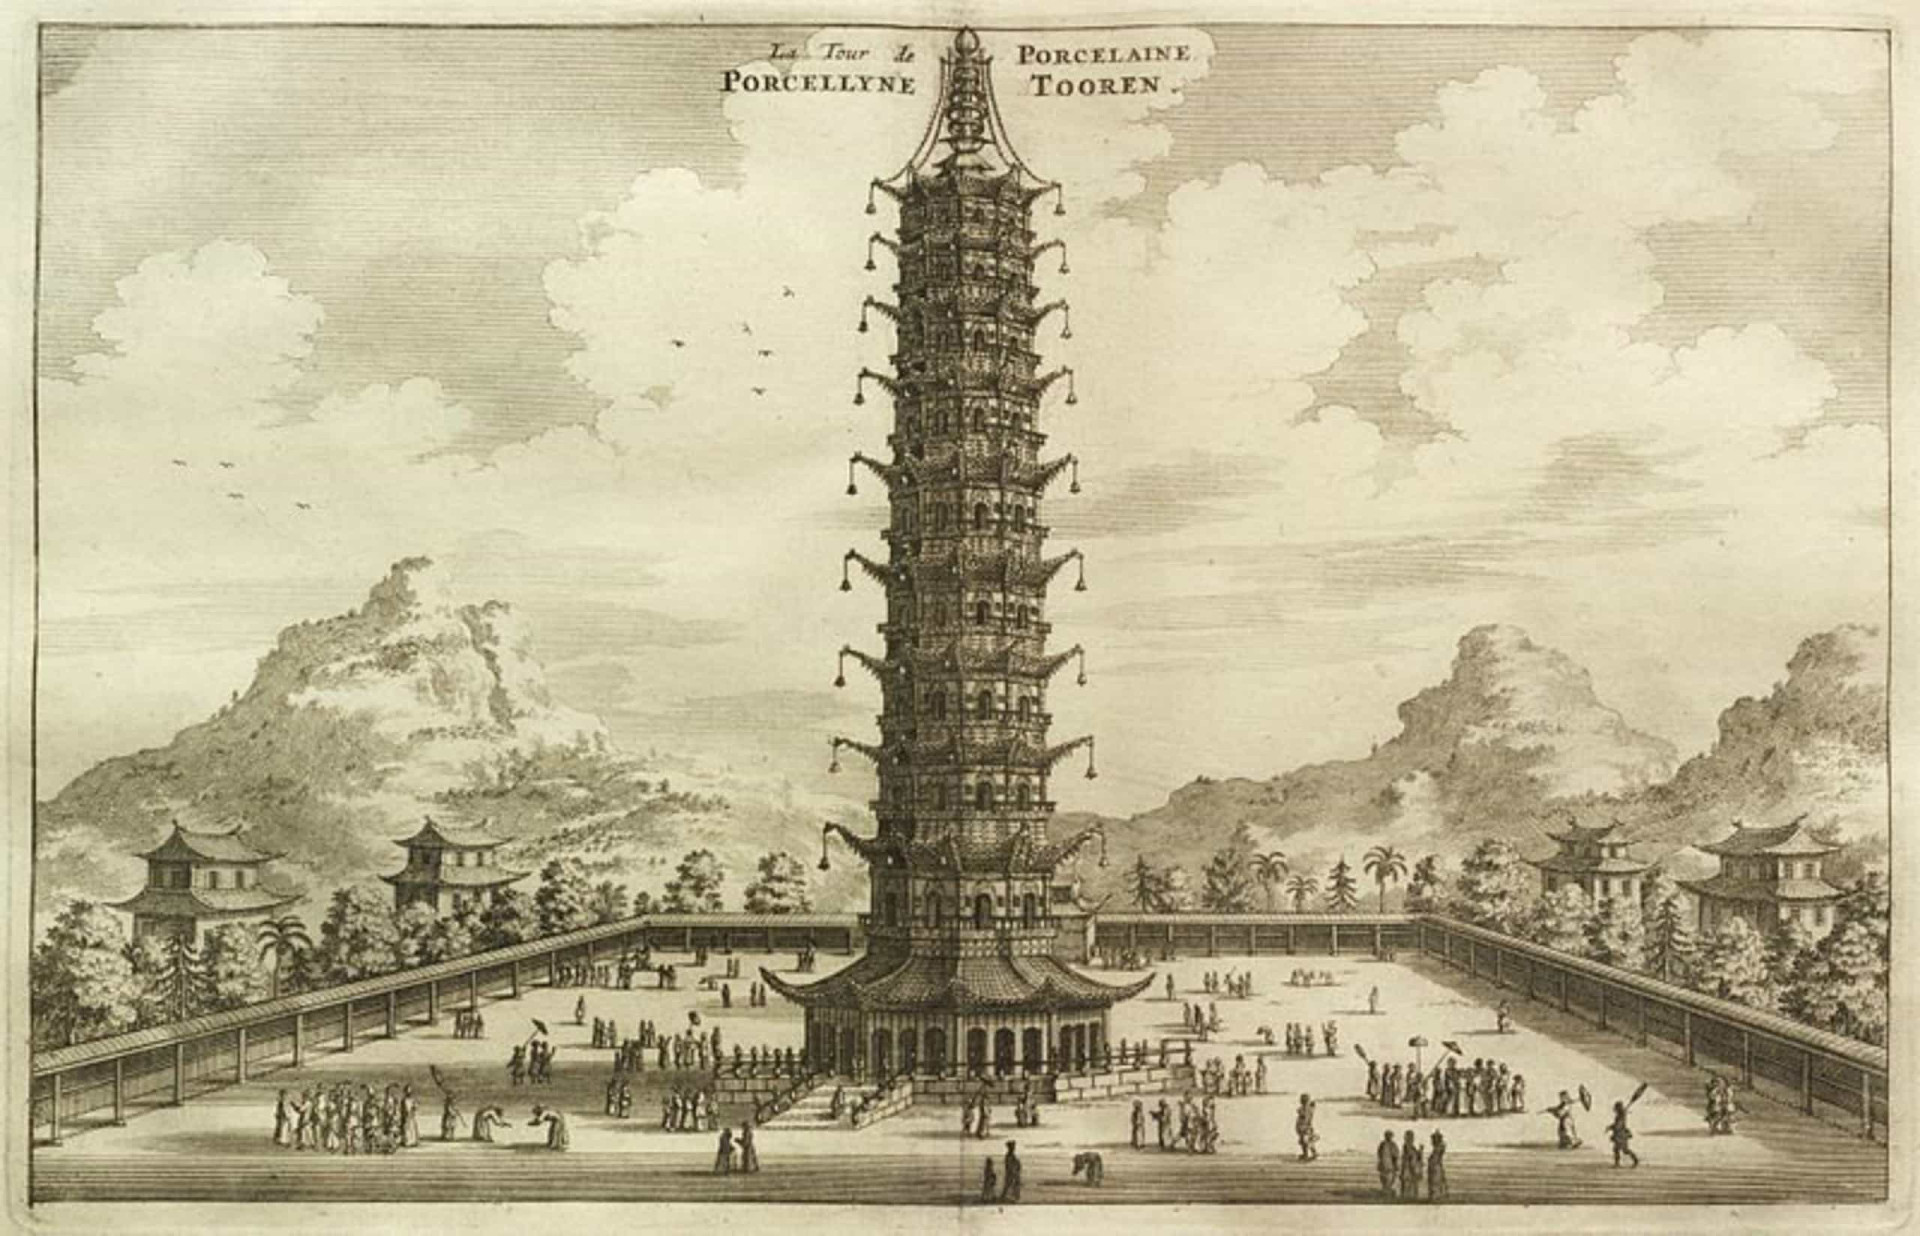 <p>The Porcelain Tower of Nanjing was considered one of the Seven Wonders of the Middle Ages when it was built in the early 15th century. But the nine-story pagoda was ultimately destroyed during the Taiping Rebellion of the 1850s. Today, a modern life size replica stands on the original site.</p><p><a href="https://www.msn.com/en-my/community/channel/vid-7xx8mnucu55yw63we9va2gwr7uihbxwc68fxqp25x6tg4ftibpra?cvid=94631541bc0f4f89bfd59158d696ad7e">Follow us and access great exclusive content every day</a></p>